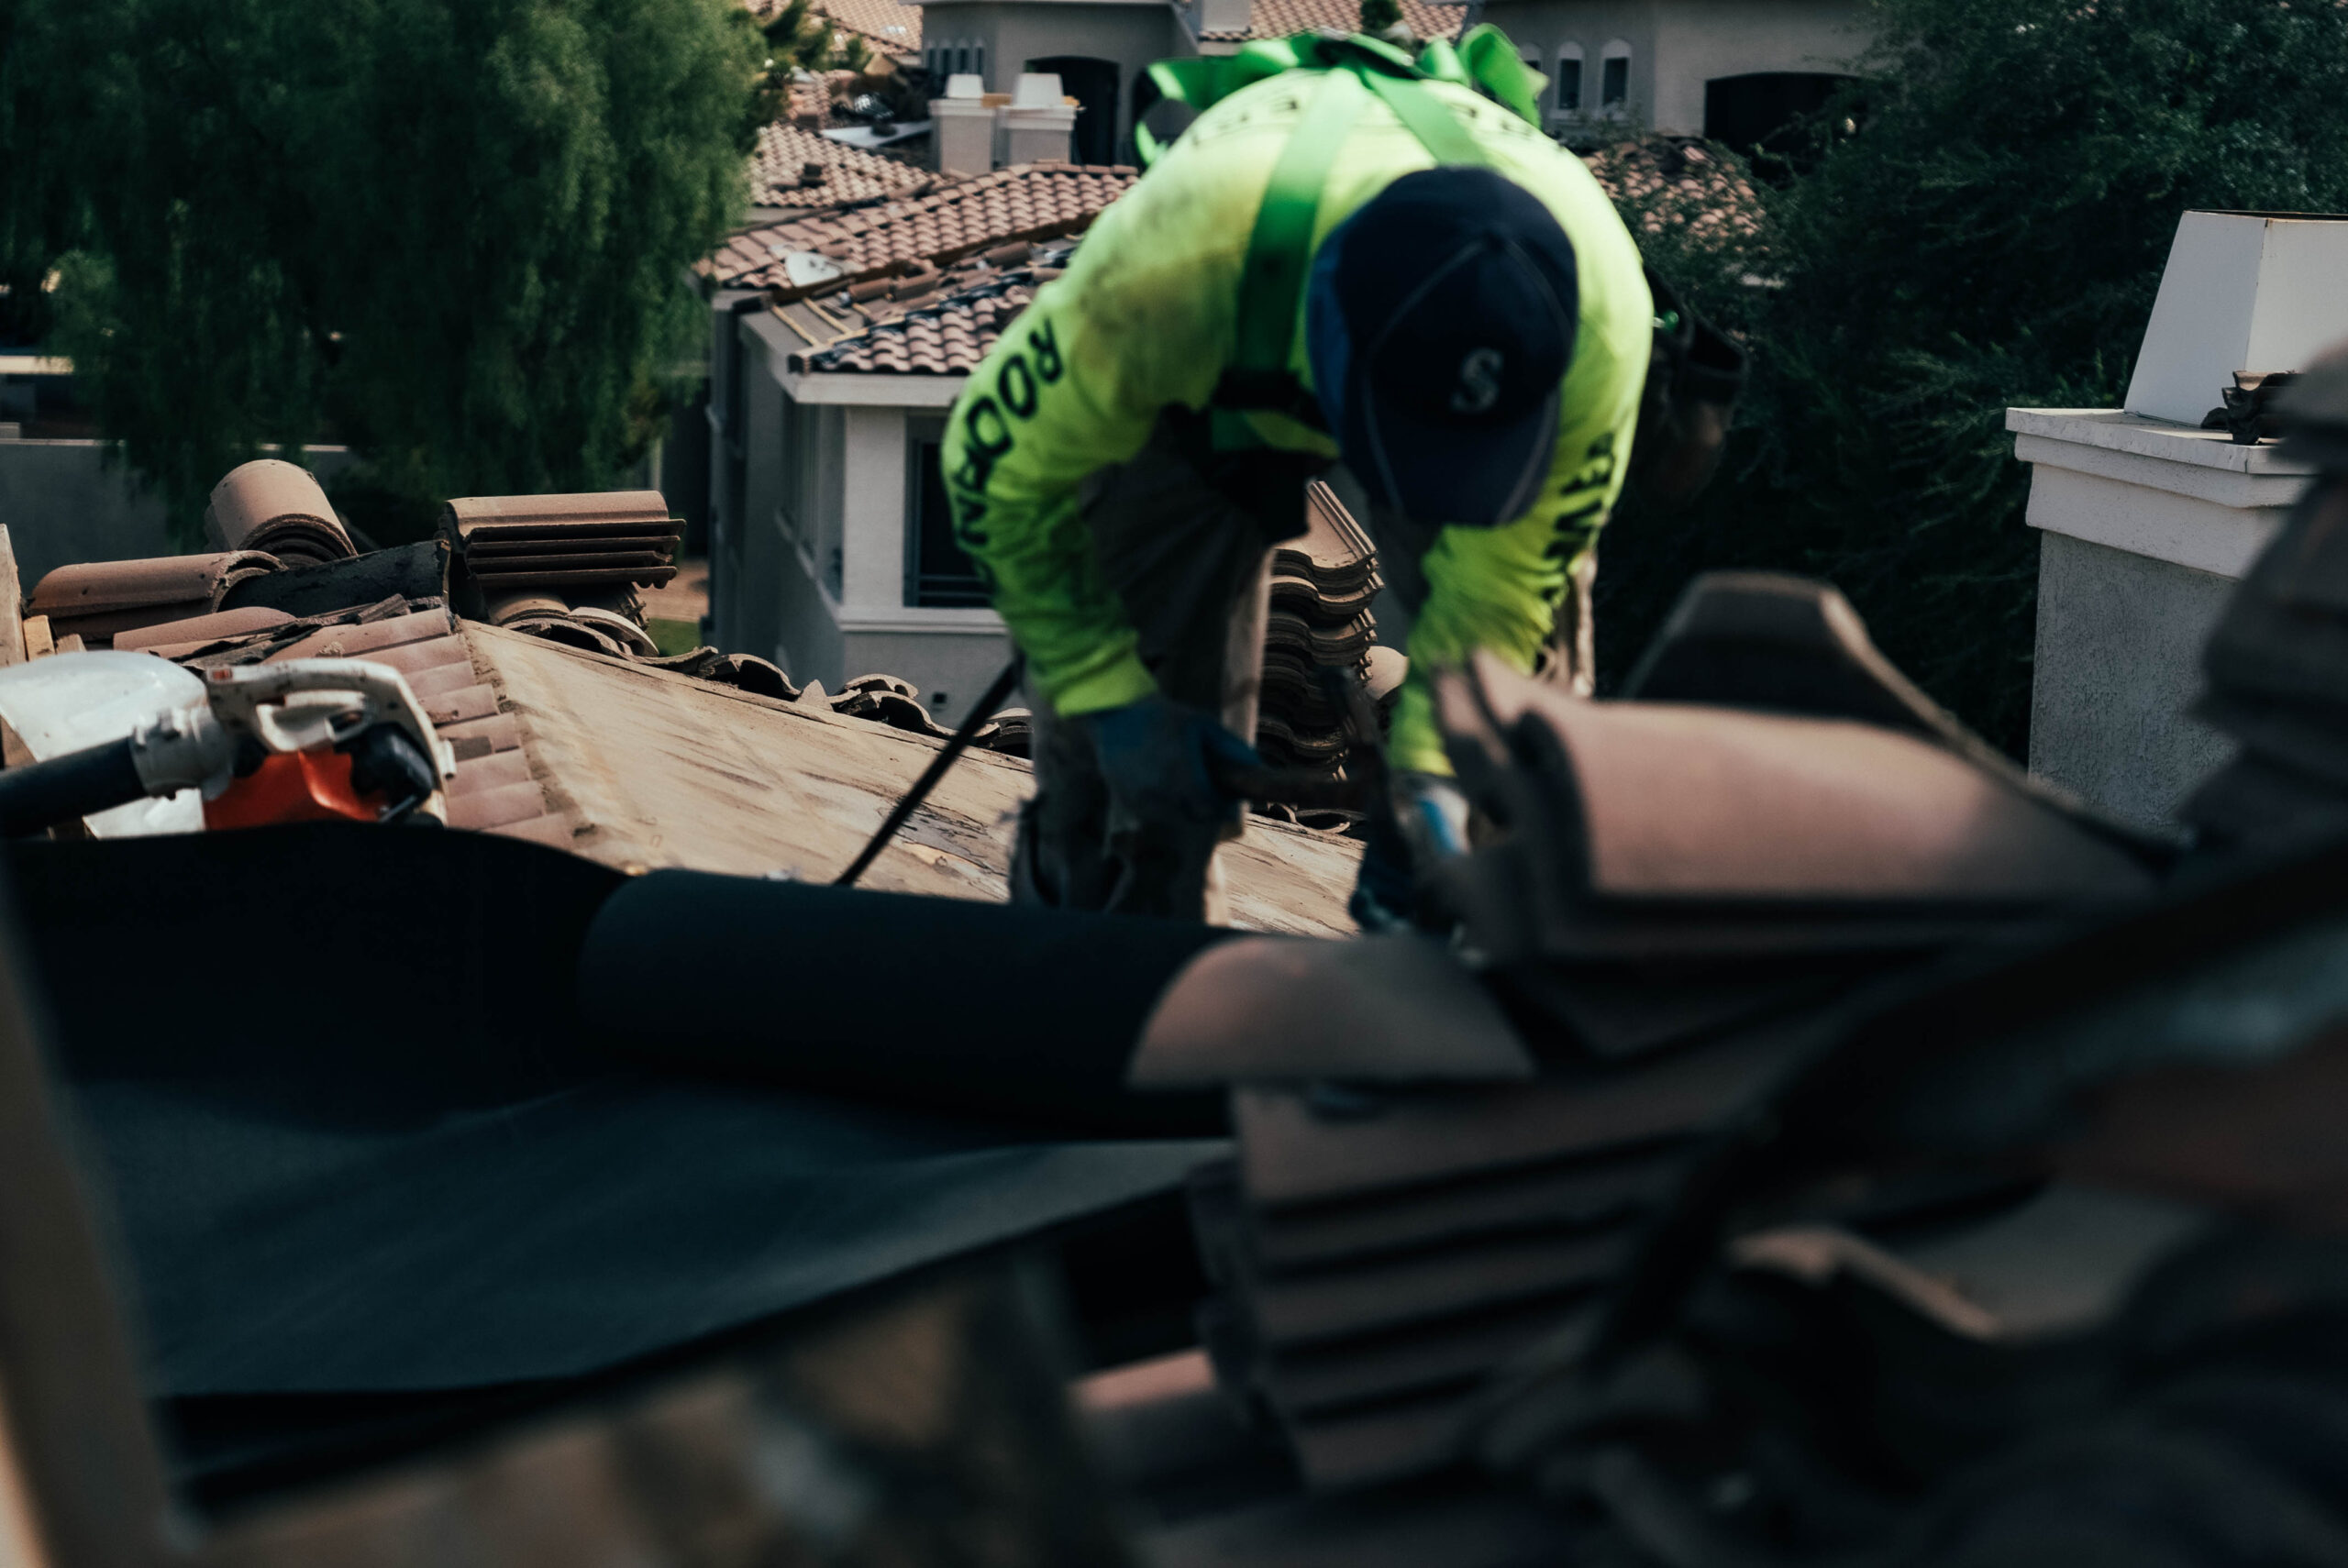 Desert Mountain roofer meticulously placing tiles on a rooftop.